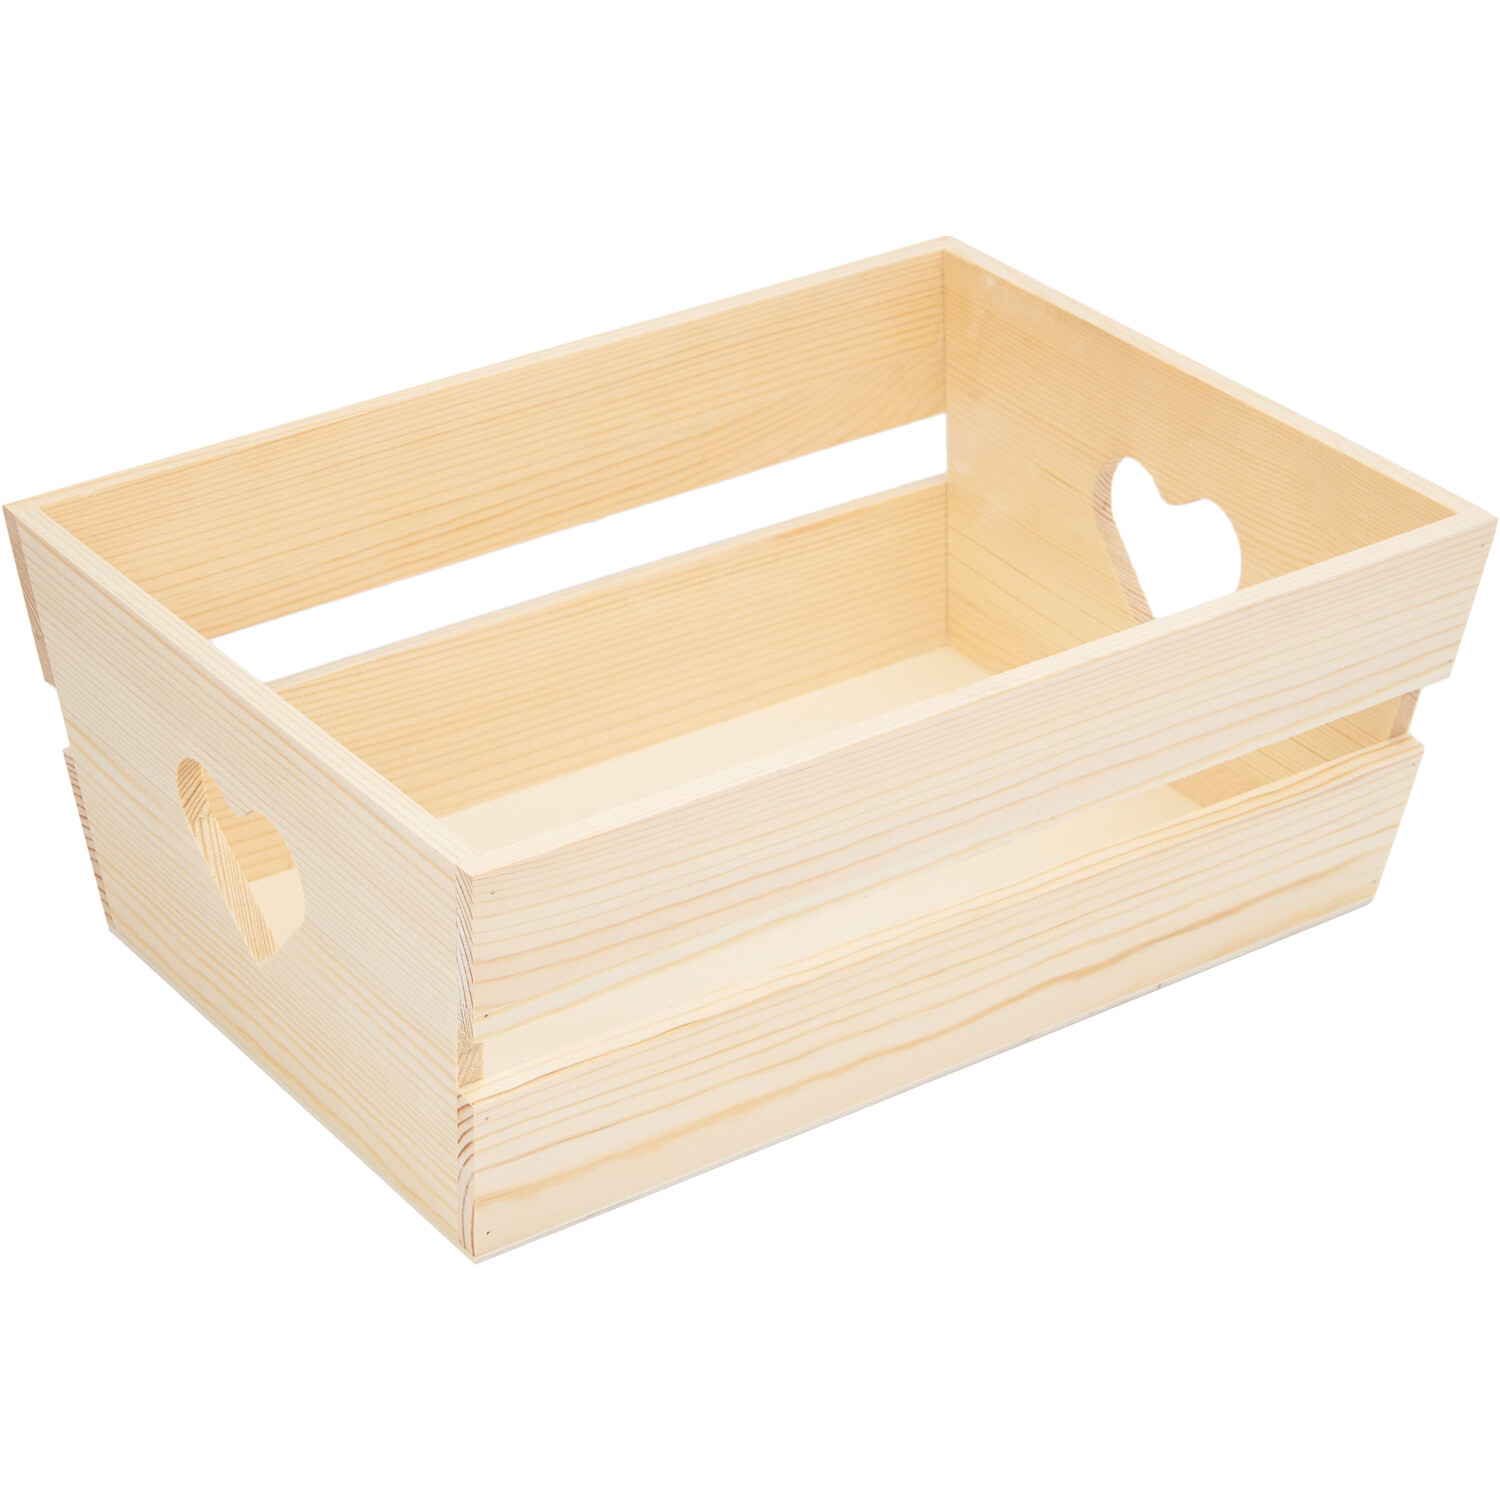 Wooden Craft Crate Image 1